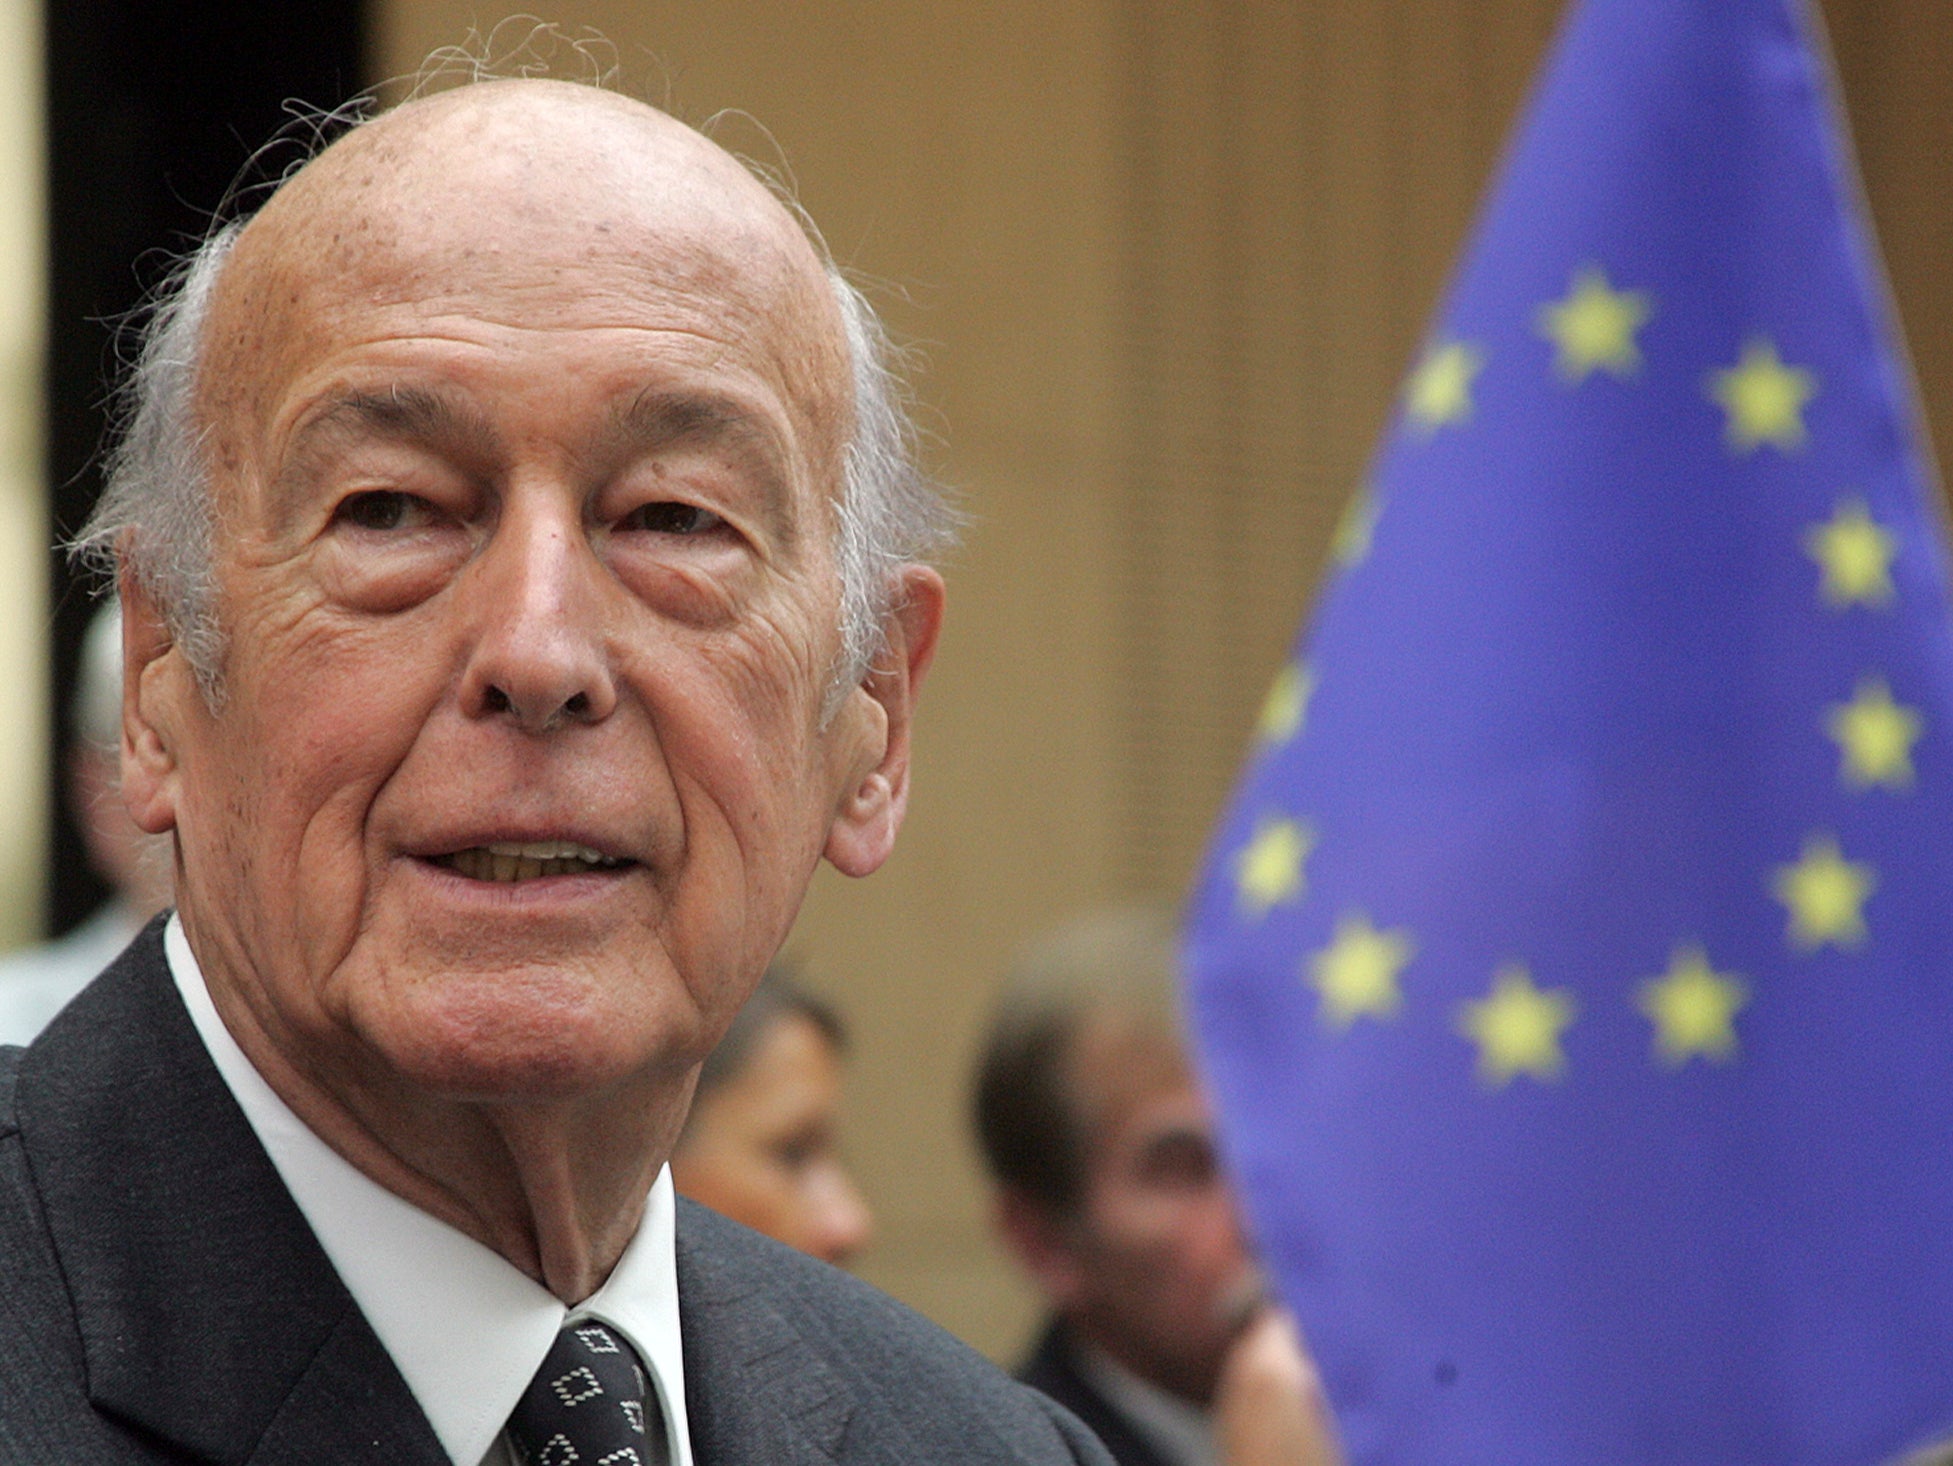 Valery Giscard d’Estaing, a former French president, has died aged 94